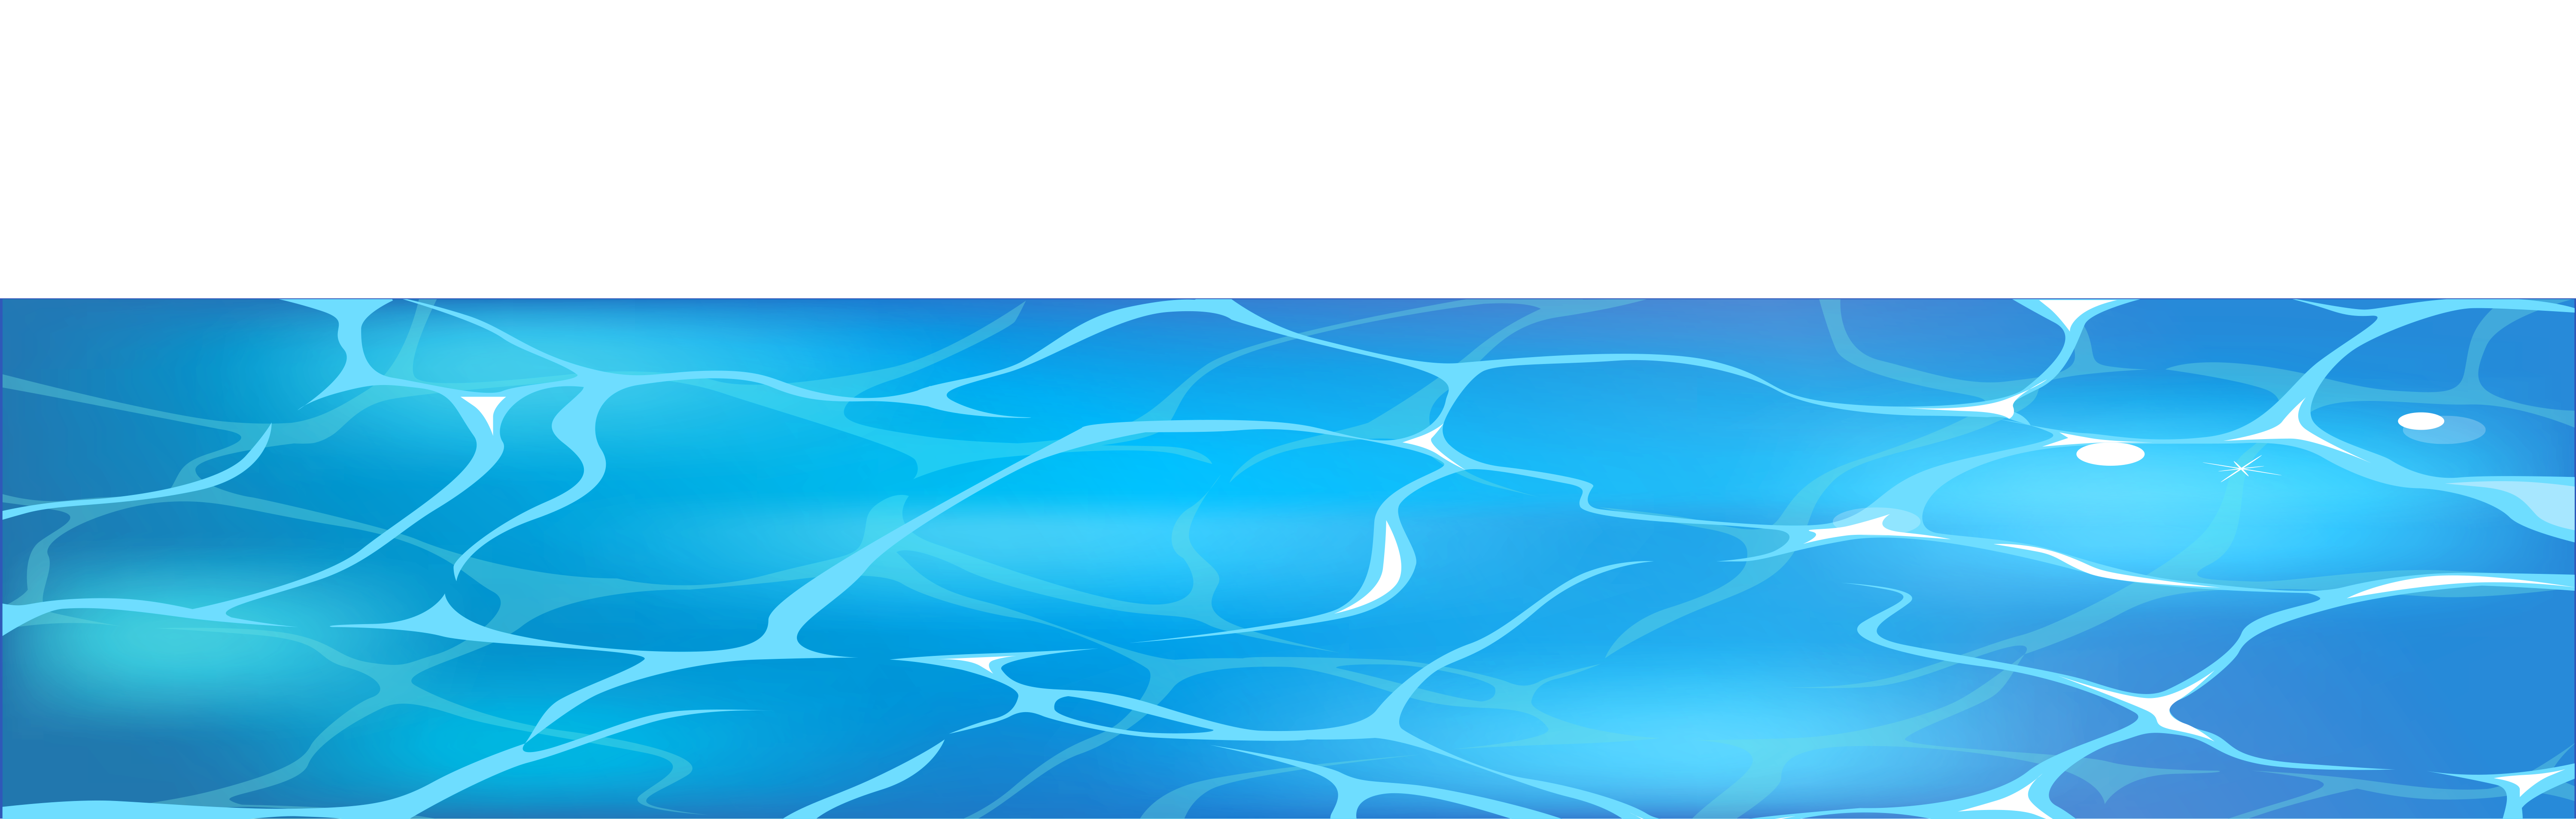 Evaporation clipart ocean.  collection of water